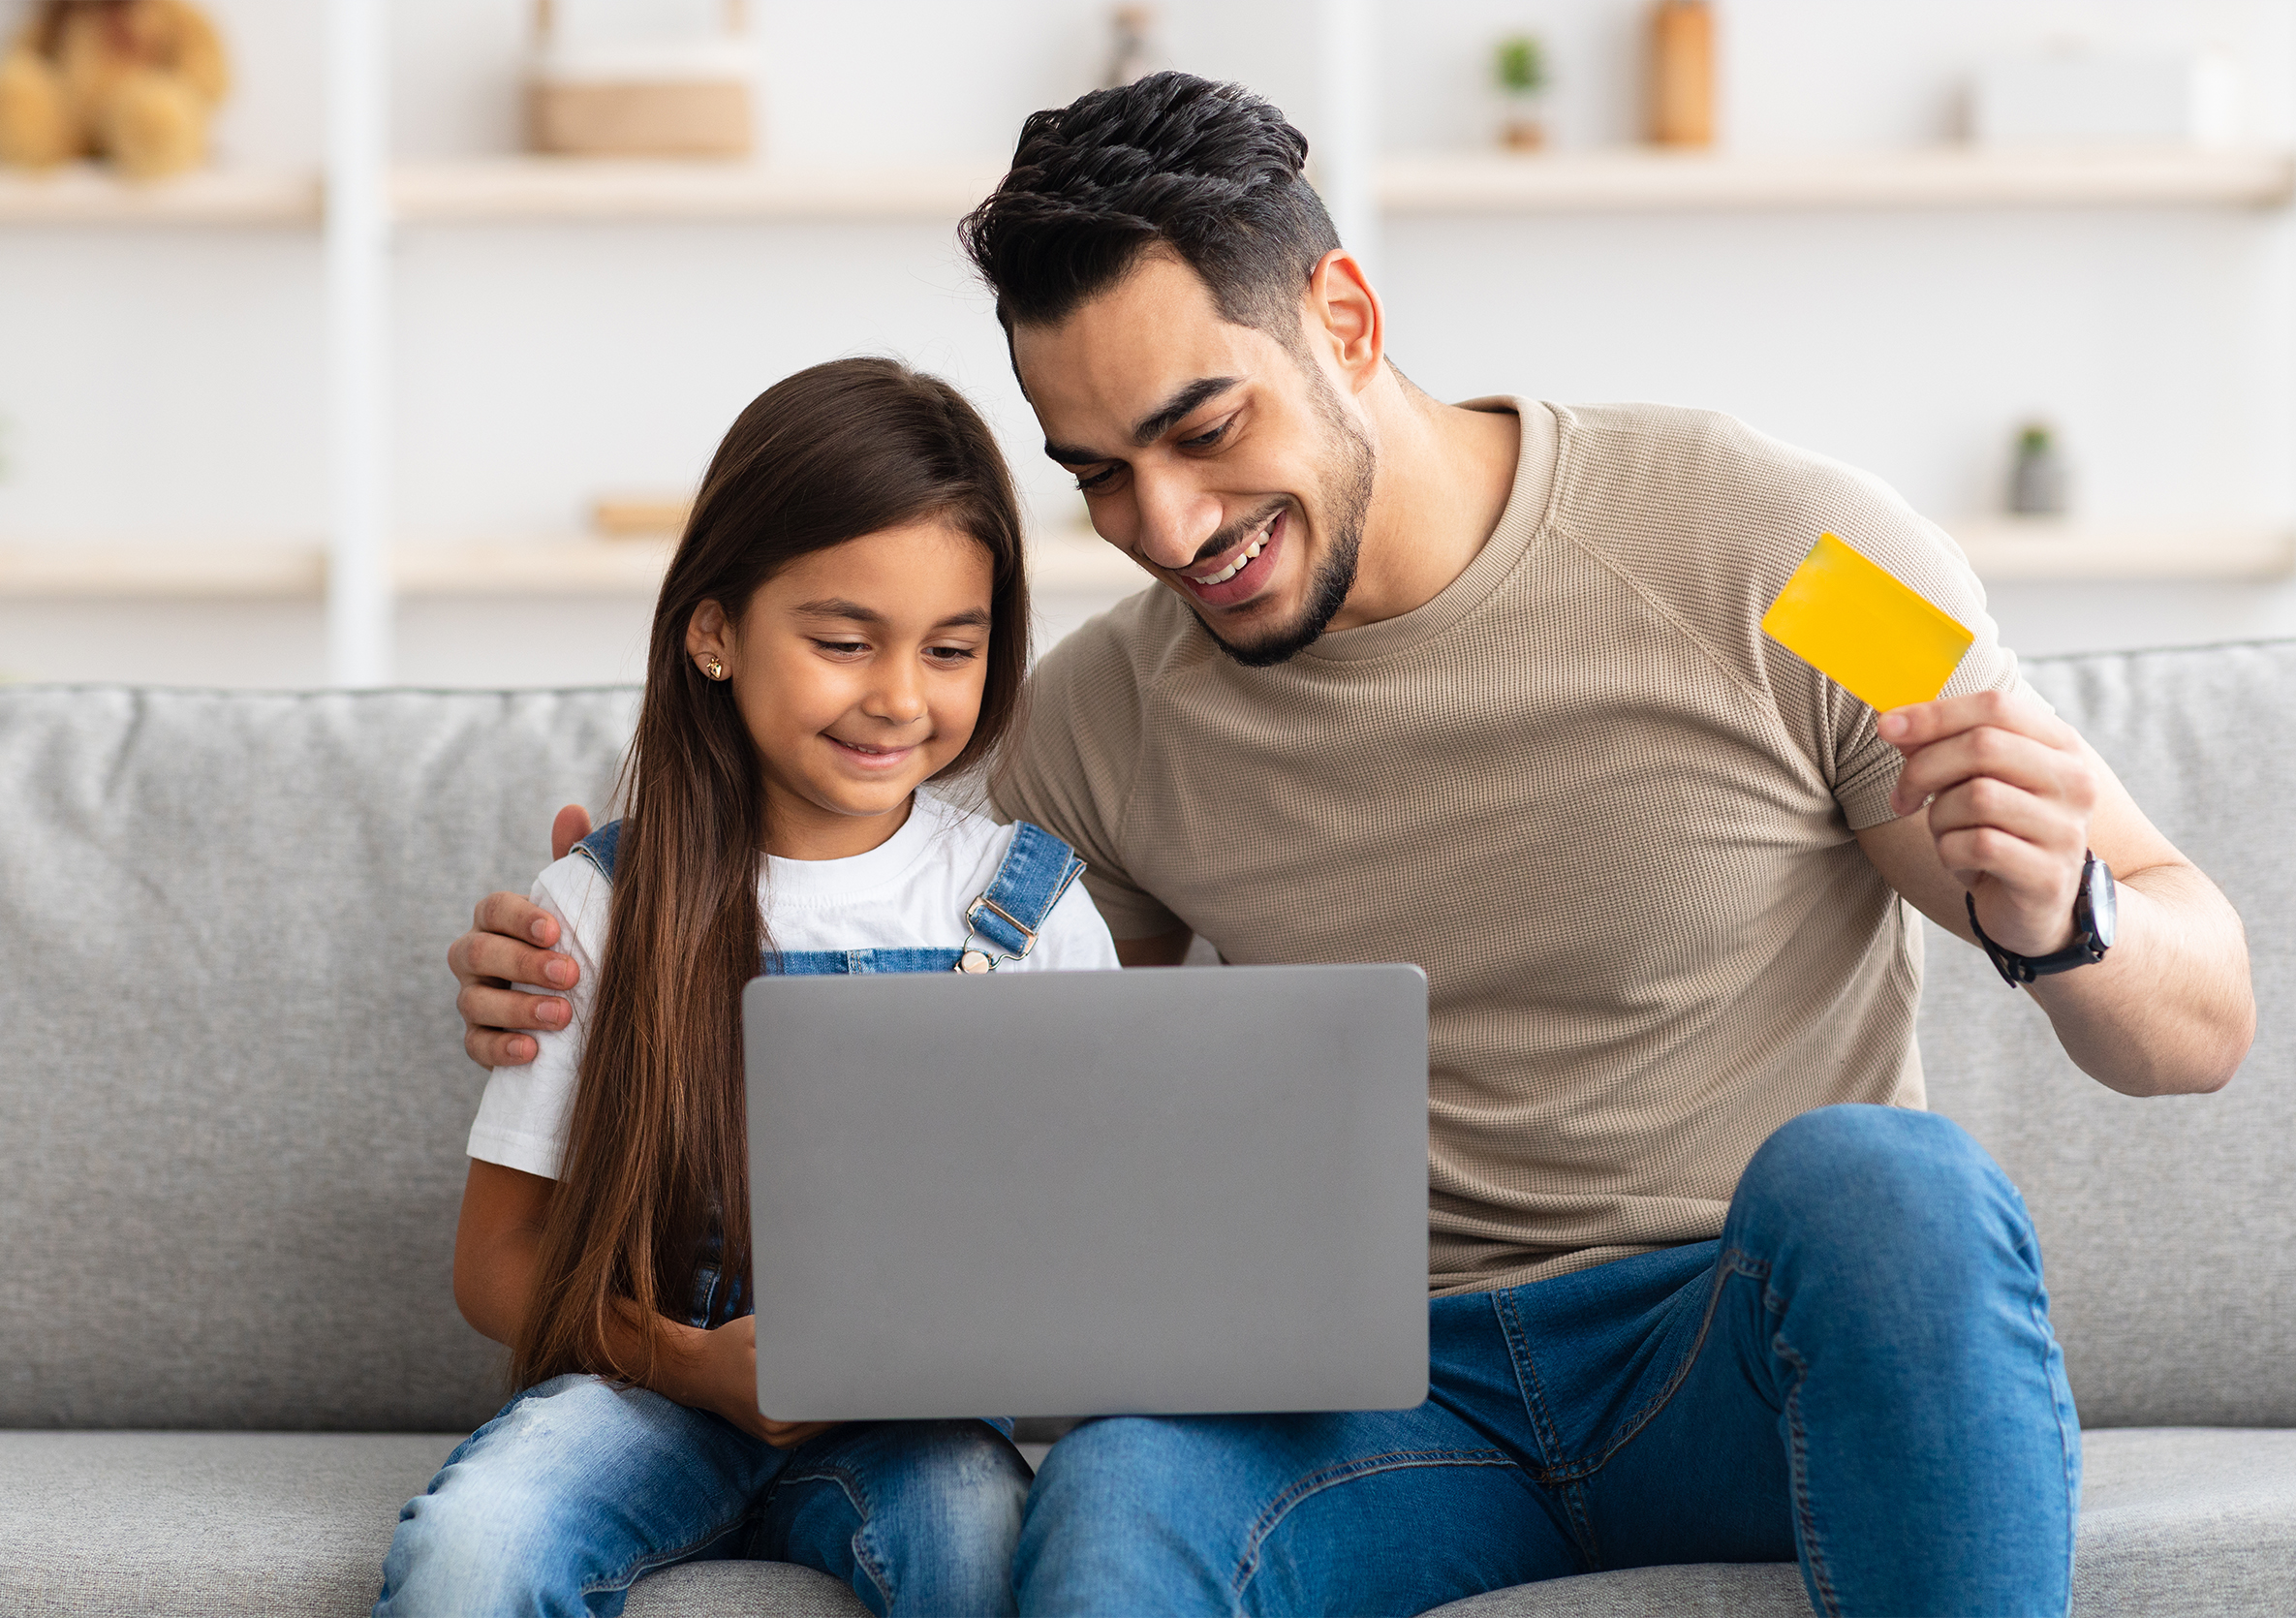 Father and daughter holding a gift card and sitting in front of a computer screen.